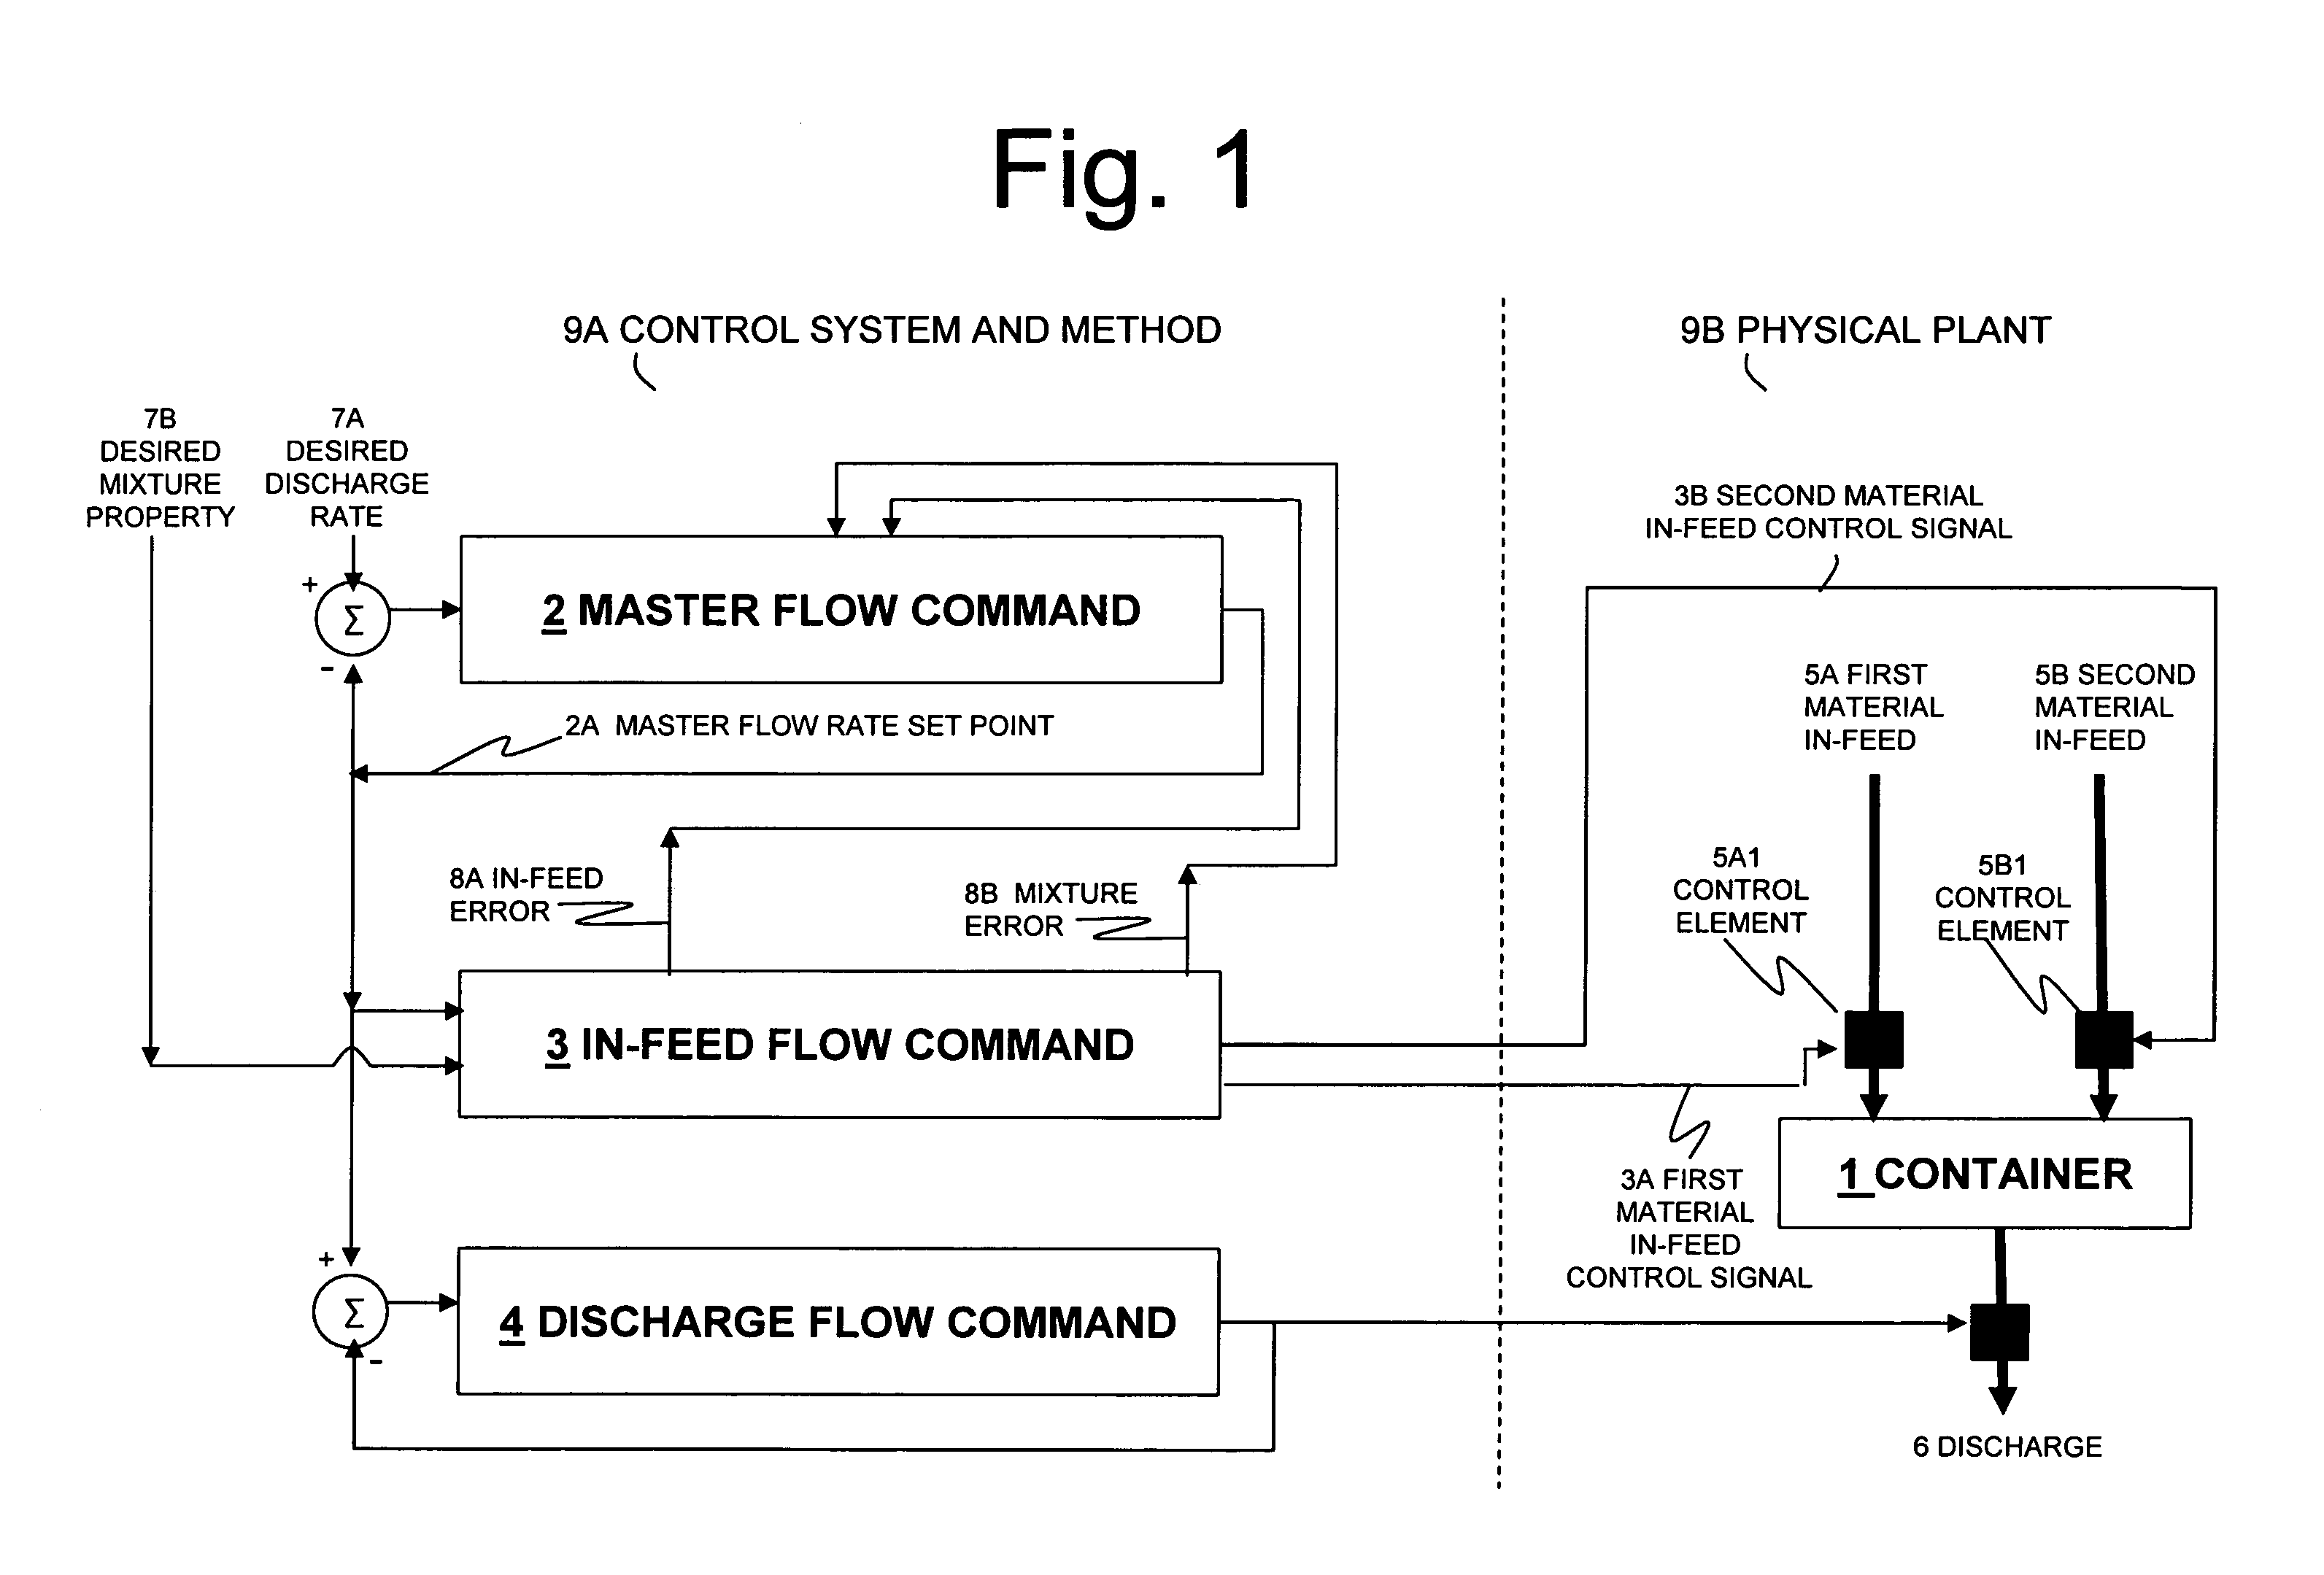 Systems for self-balancing control of mixing and pumping